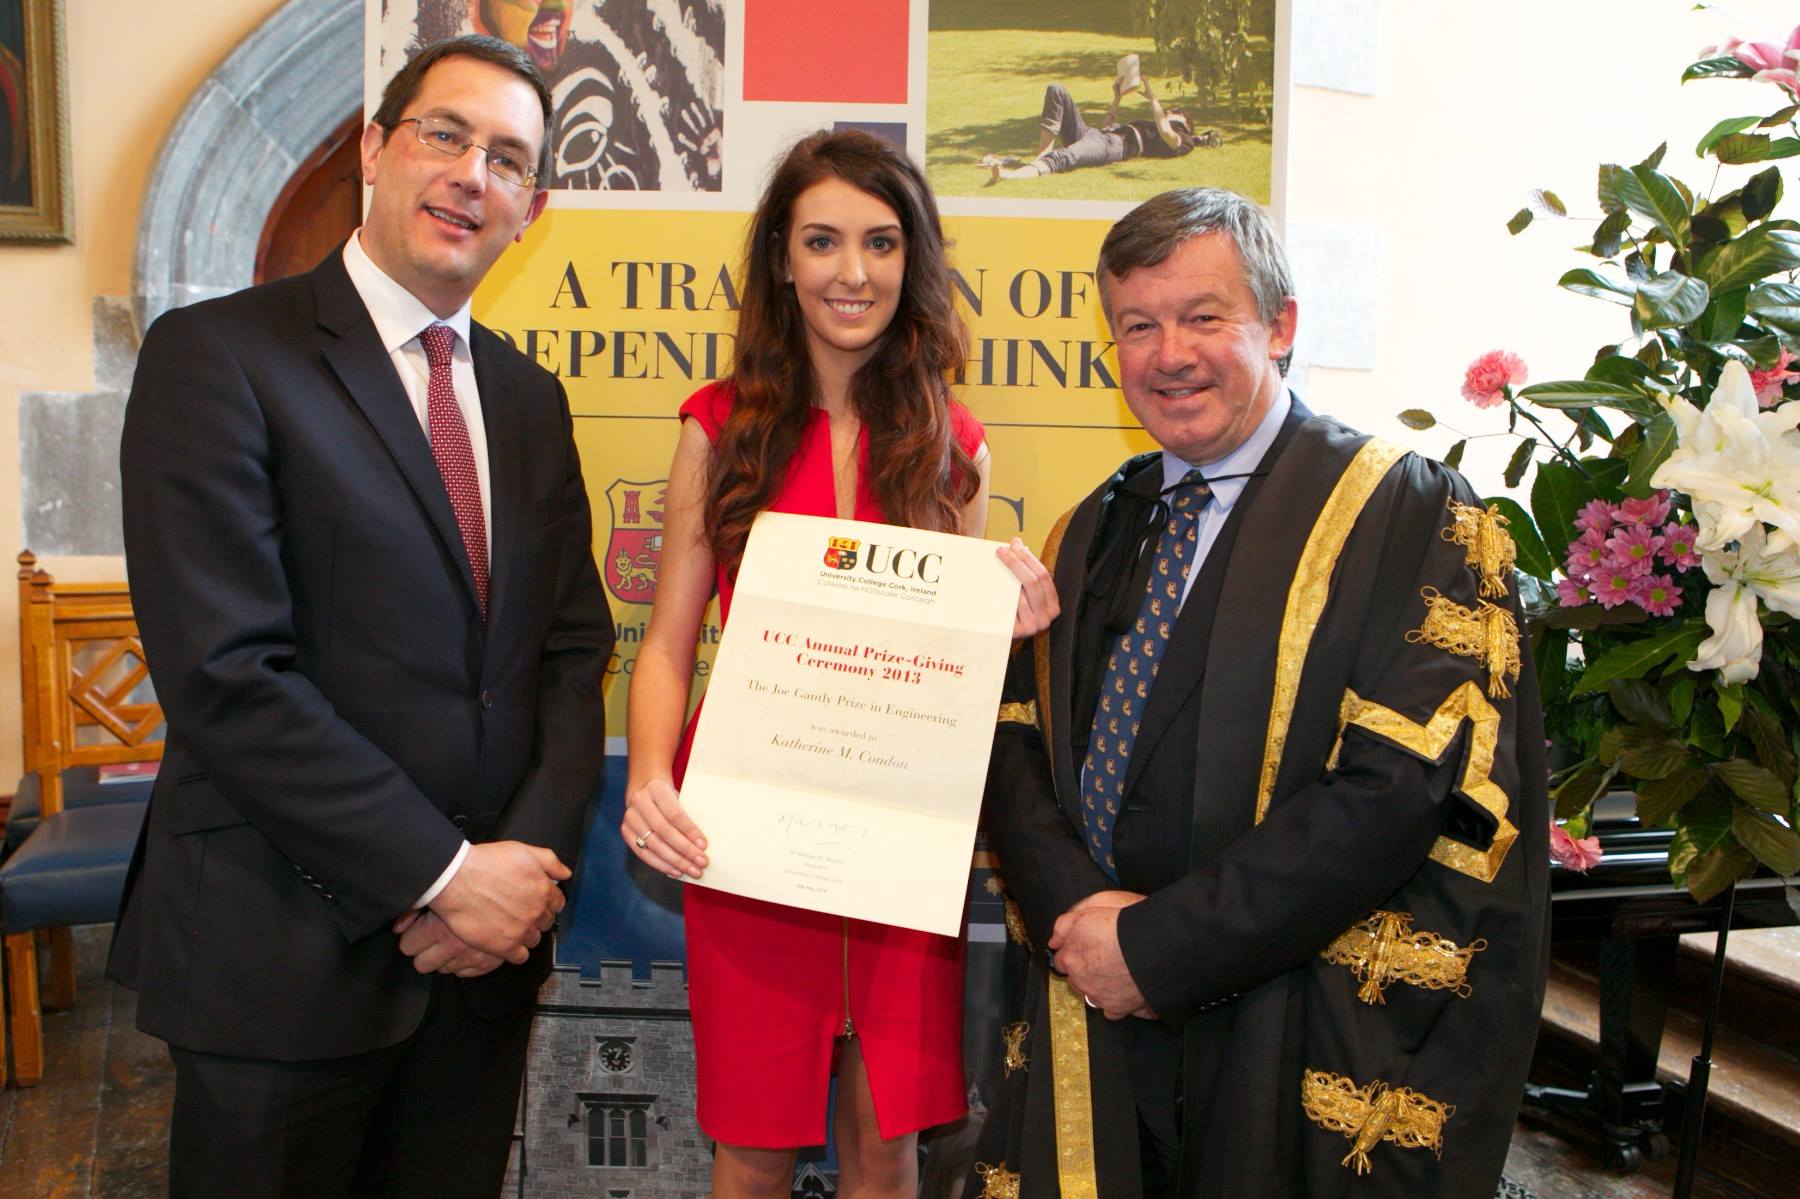 Katherine Condon is awarded the Joe Gantly Prize for Engineering at the UCC Annual Prize Giving 2014